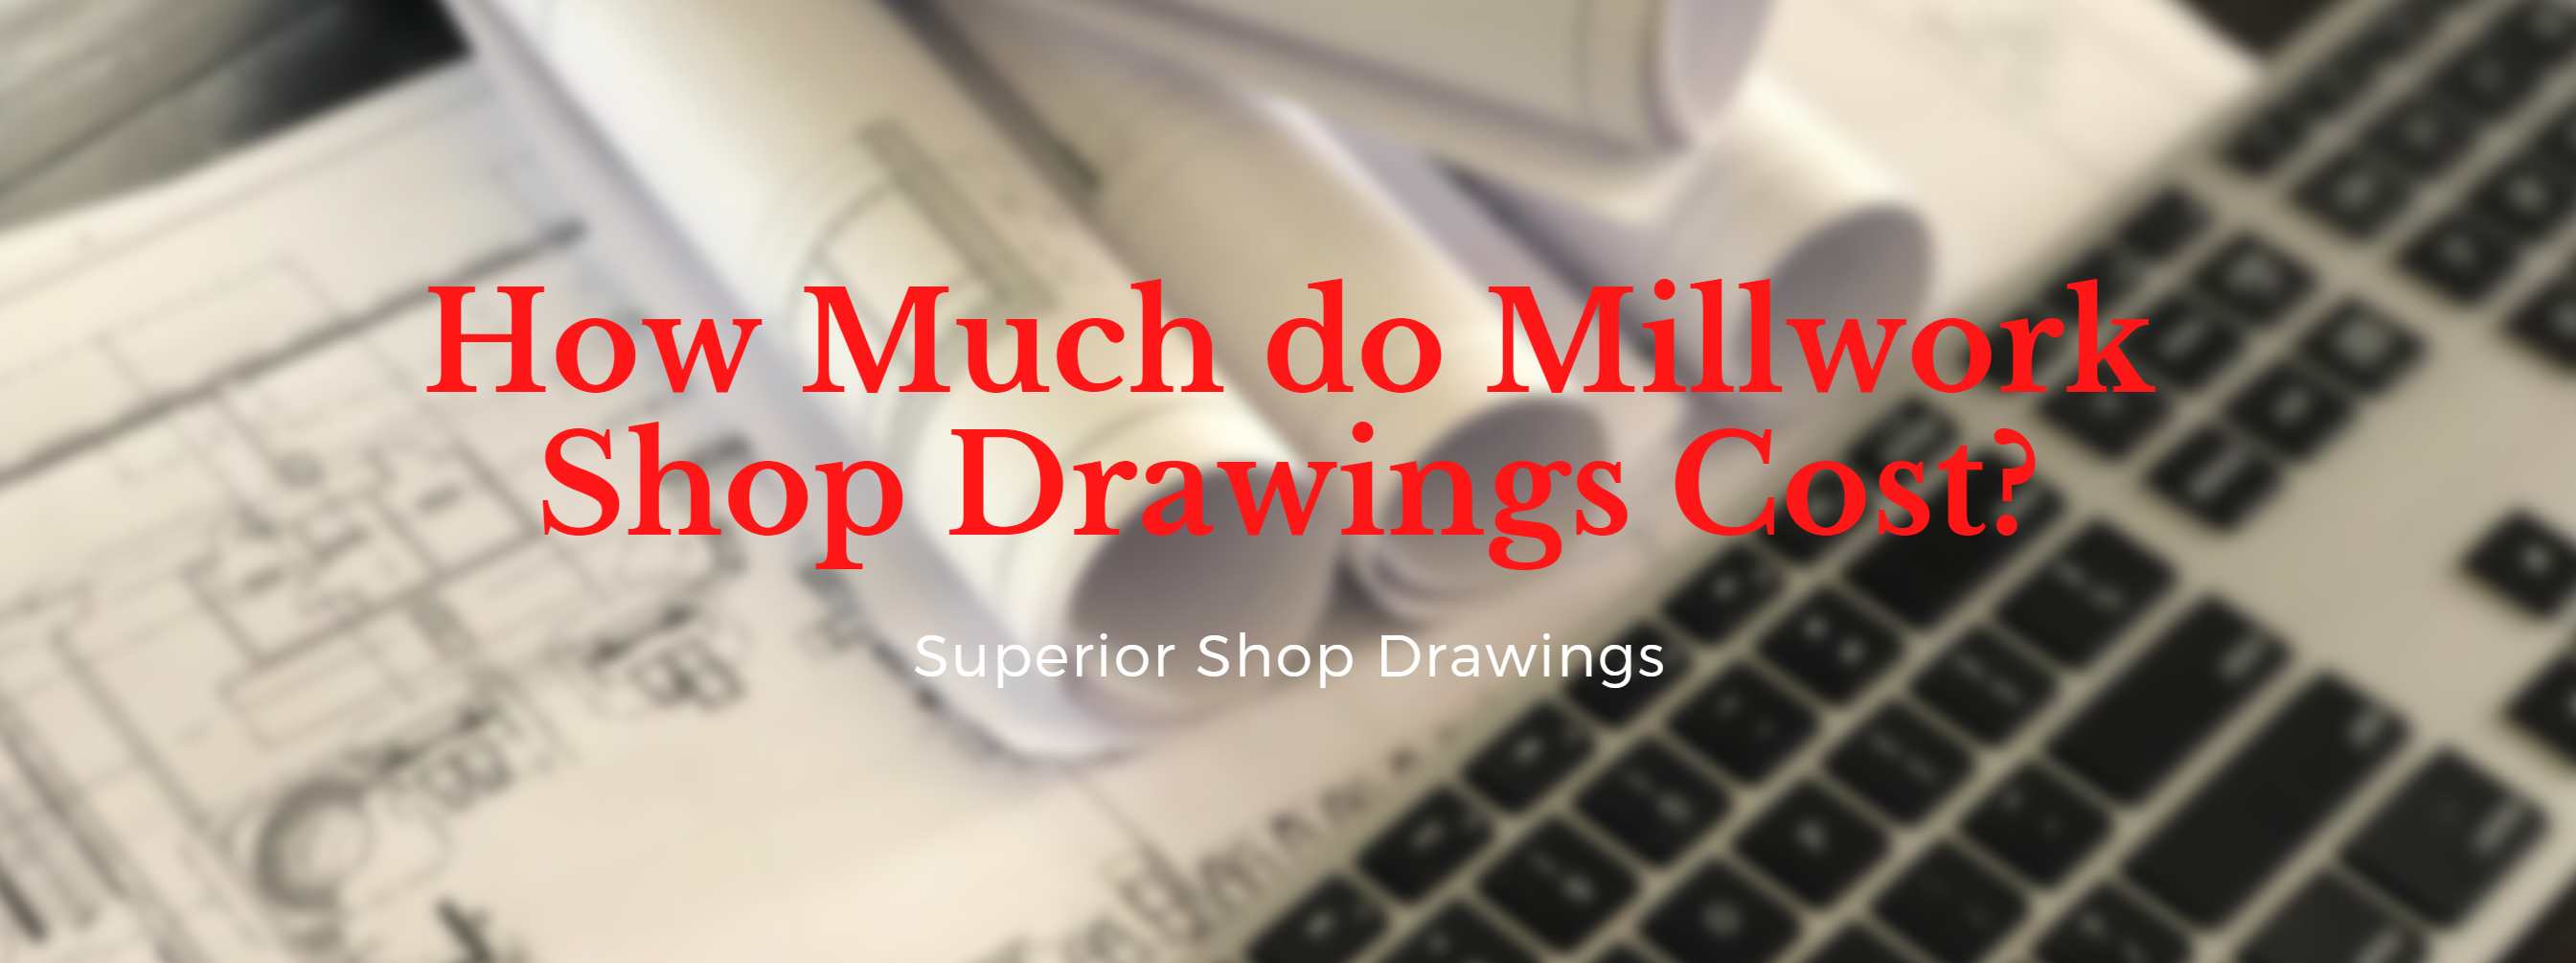 How Much do Millwork Shop Drawings Cost